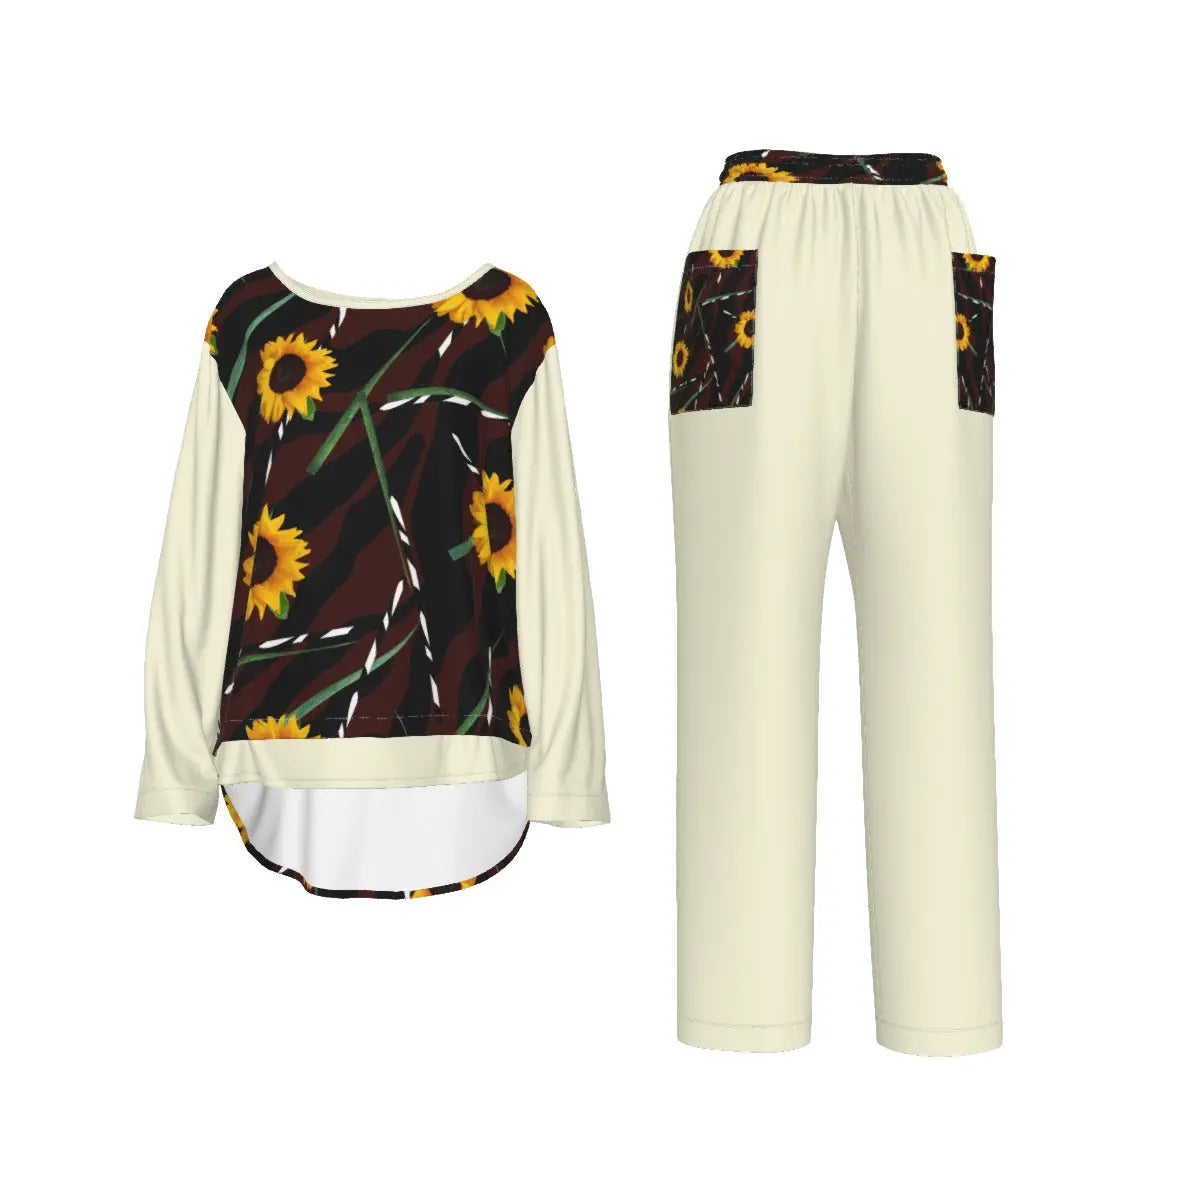 Multi-colored Sunflower Wild Women's Curved Back Hem Outfit Set - women's pants set at TFC&H Co.